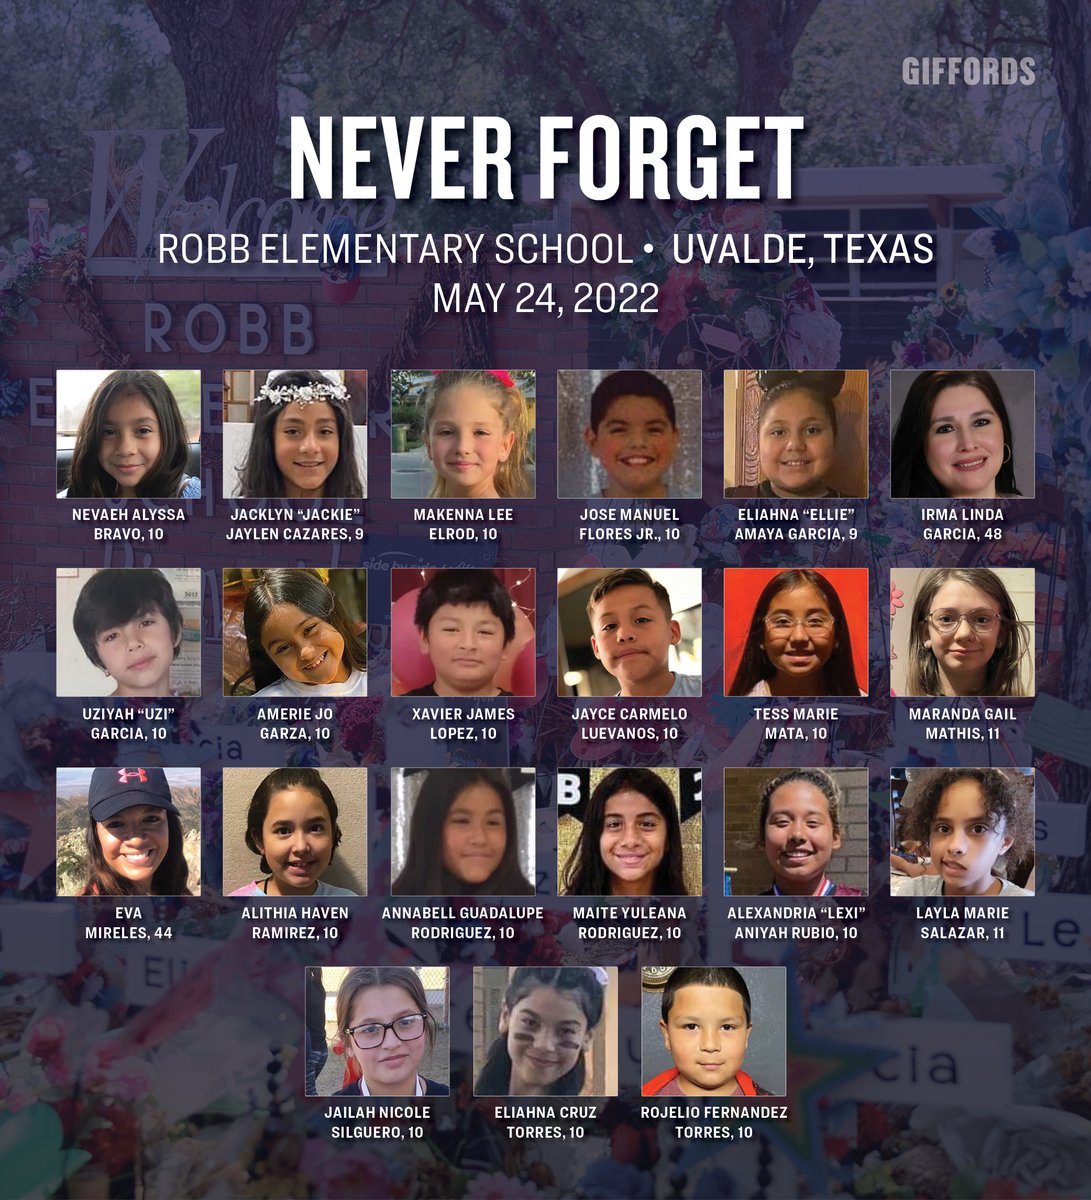 Two years ago today, 19 children and two teachers were killed and 17 more were injured at Robb Elementary School. Twenty-one families will never be whole again. For the students and educators who survived, their lives will never be the same. In the wake of this tragedy, we